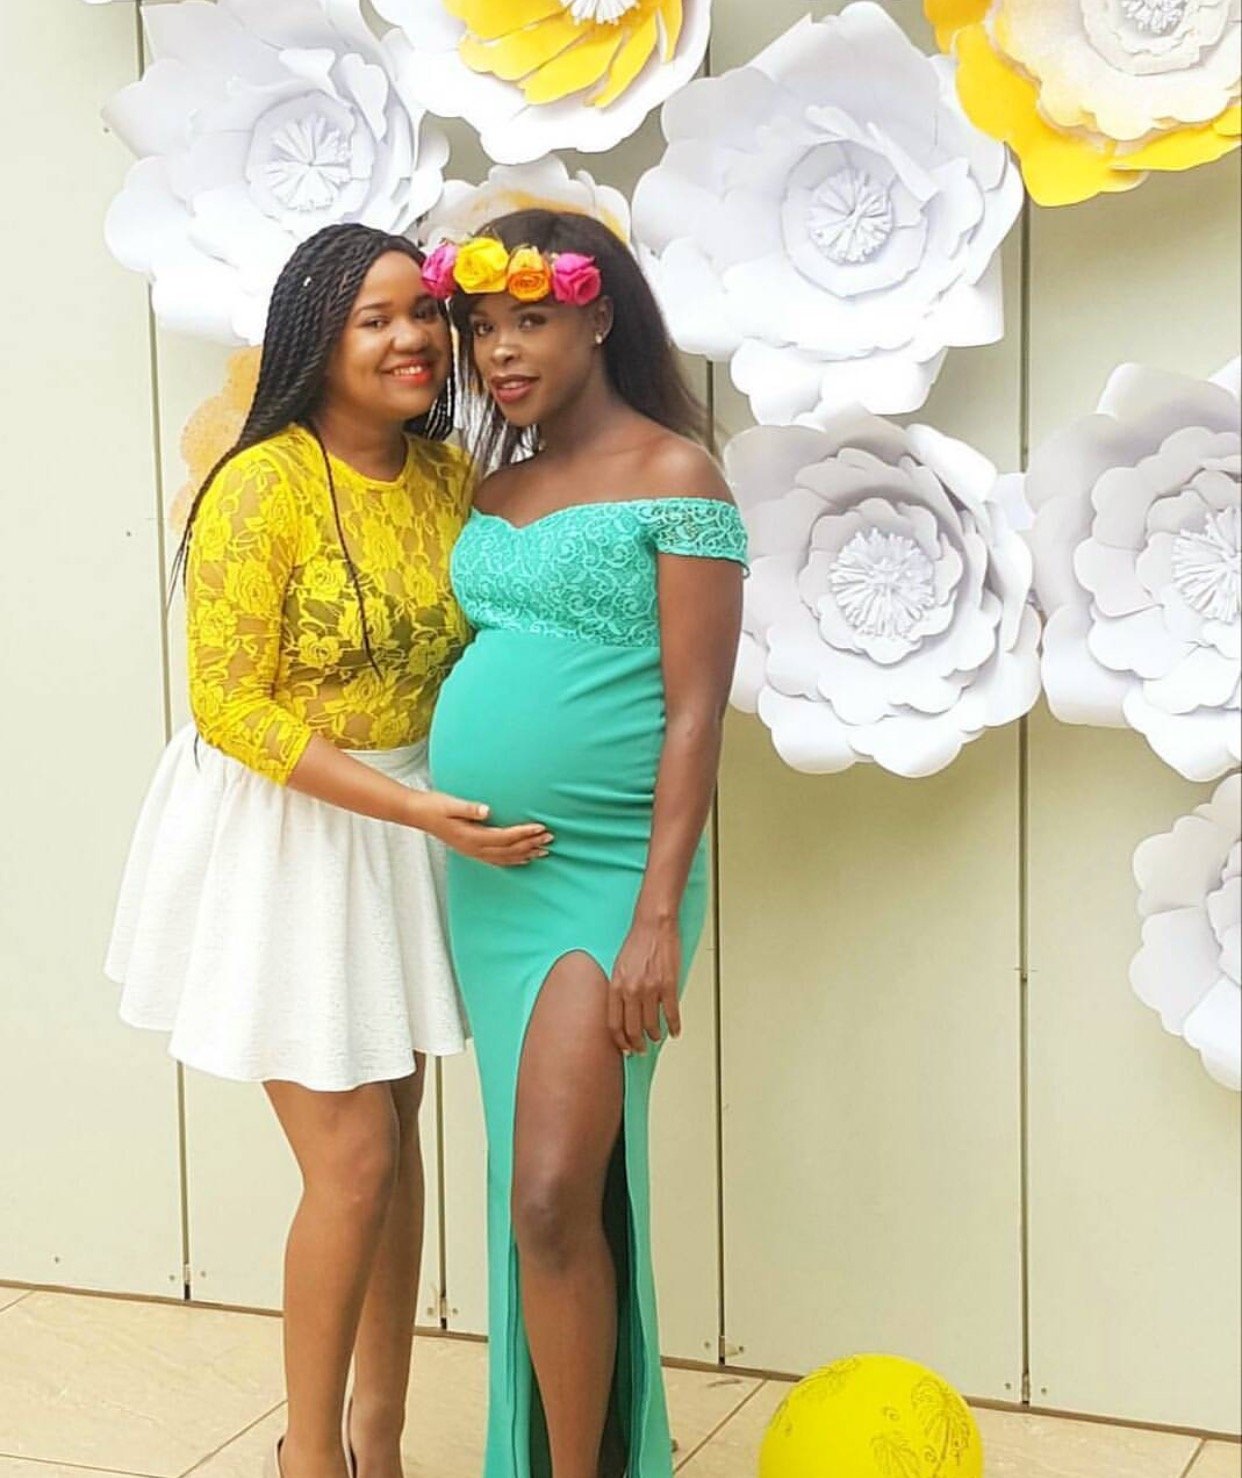 Awinja flaunts the fancy gifts she received from her baby shower, is she expecting a baby boy?